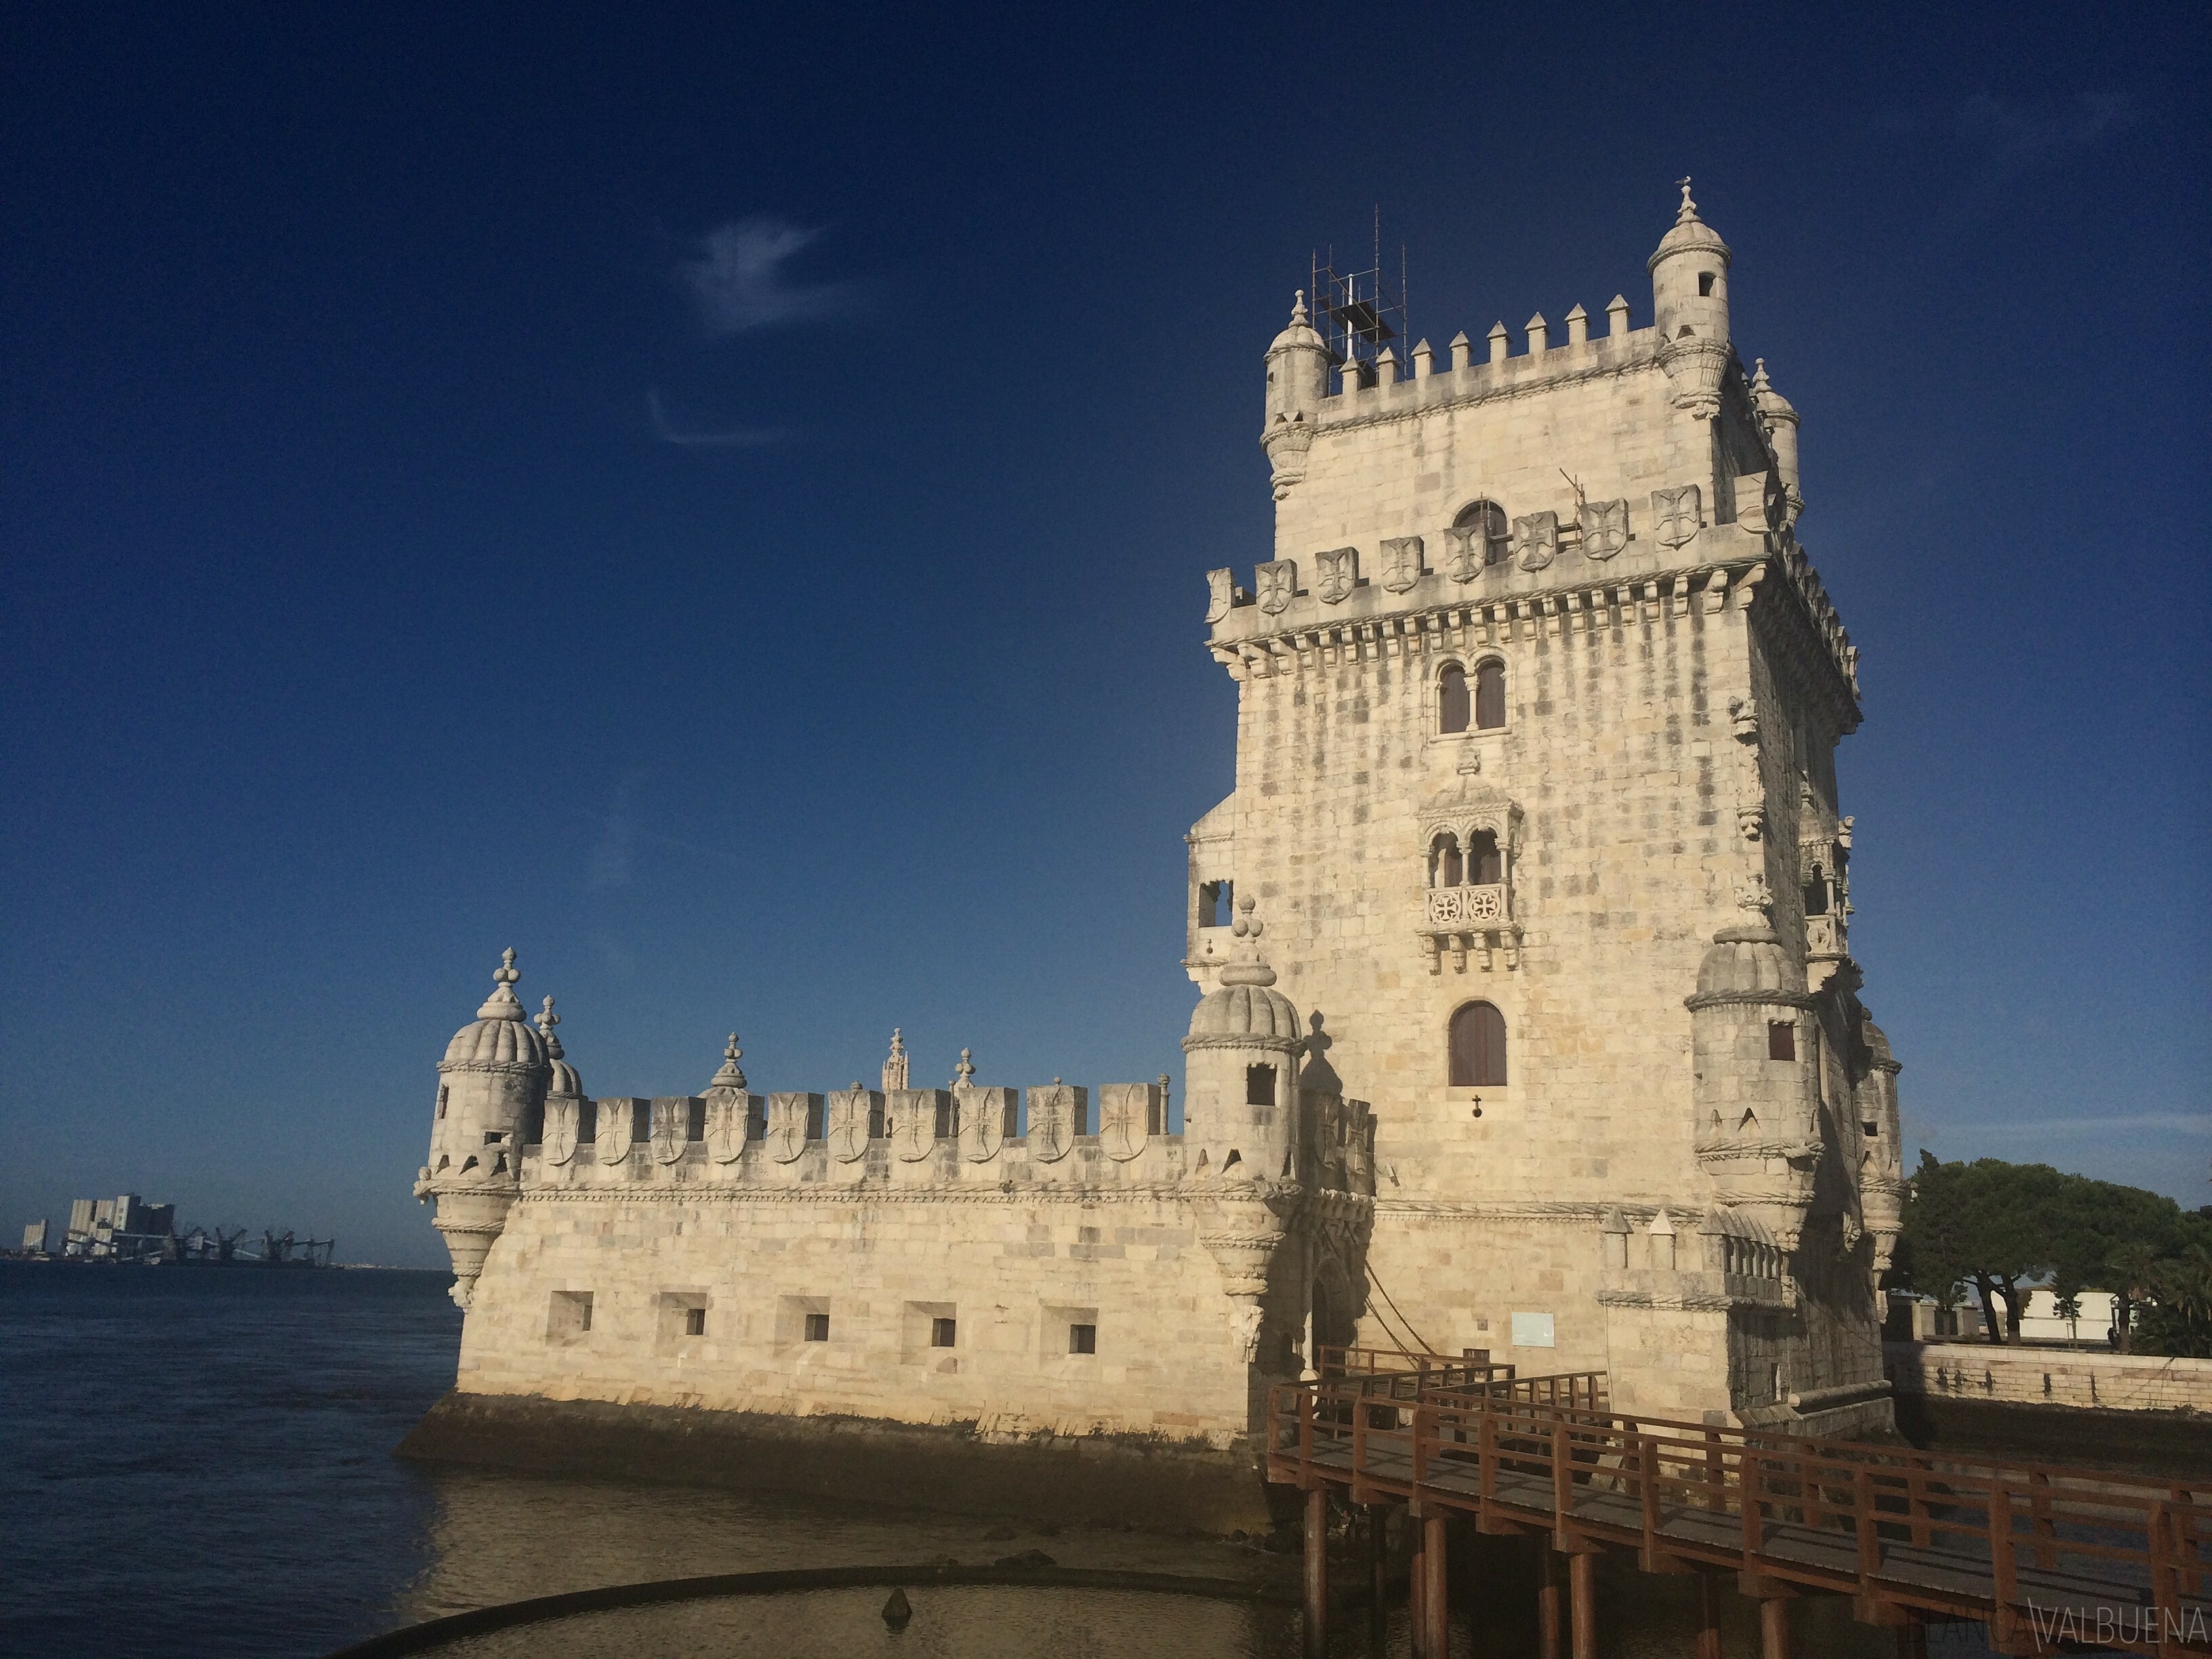 Belem's Tower is popular and the line can get long quickly